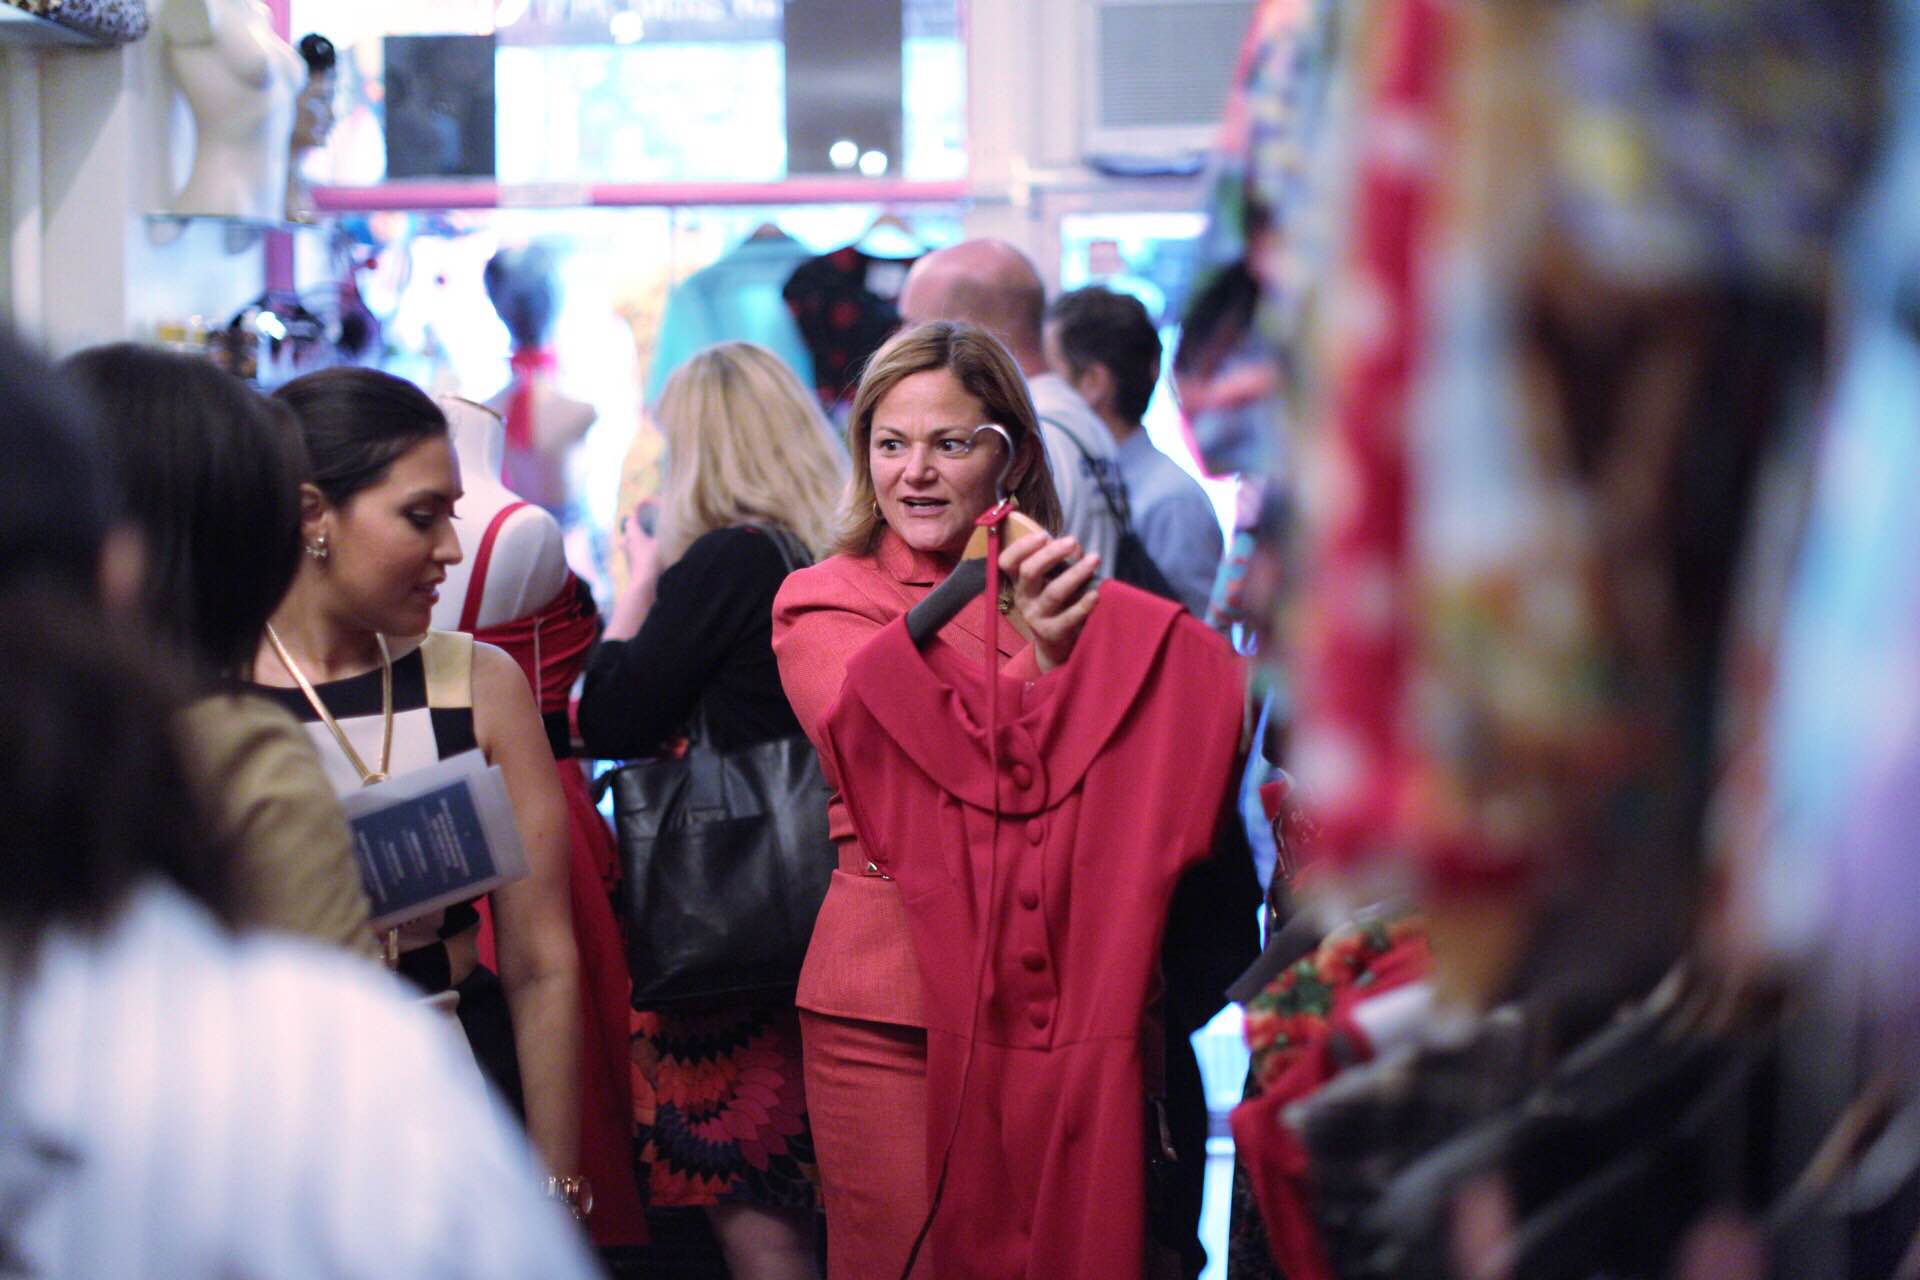 It's her color! Melissa Mark-Viverito checked out a cool vintage dress at Enz's.  Photo by William Alatriste / NYC Council